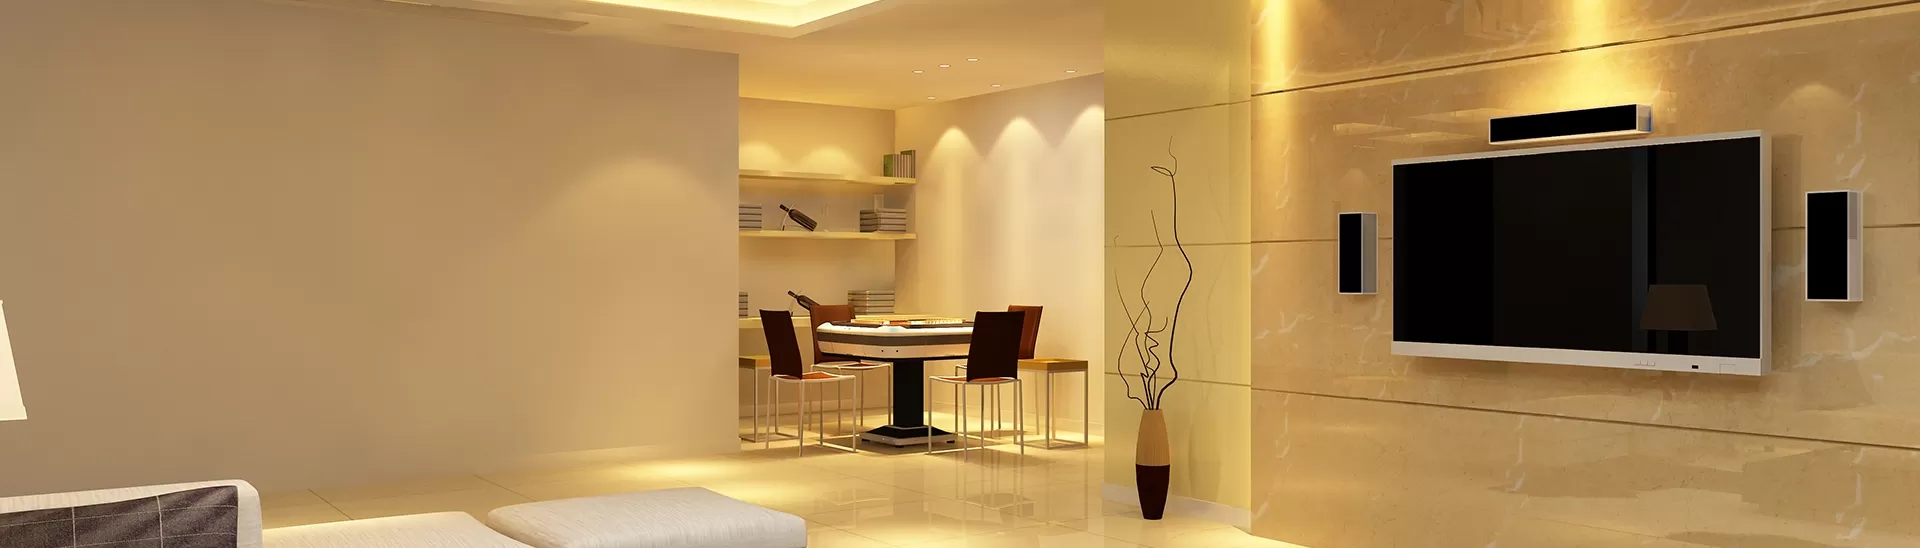 Top 10 Decorative PVC Ceiling Design for Your Home